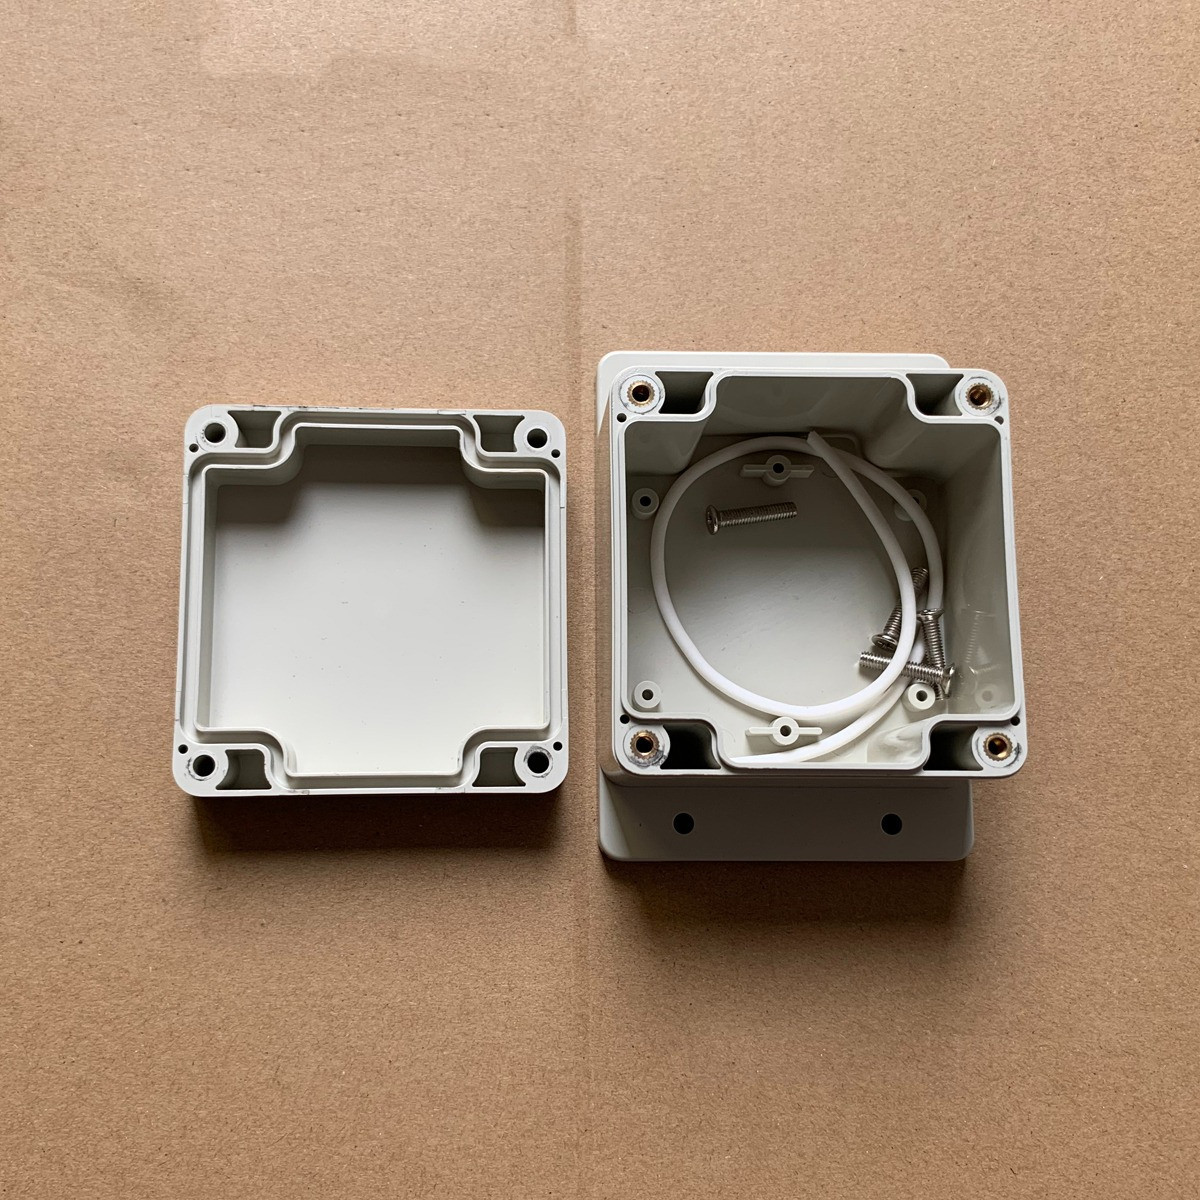  ABS Ip65 Waterproof Electrical Junction Box Switch Enclosure 83*81*56mm With Ear Manufactures